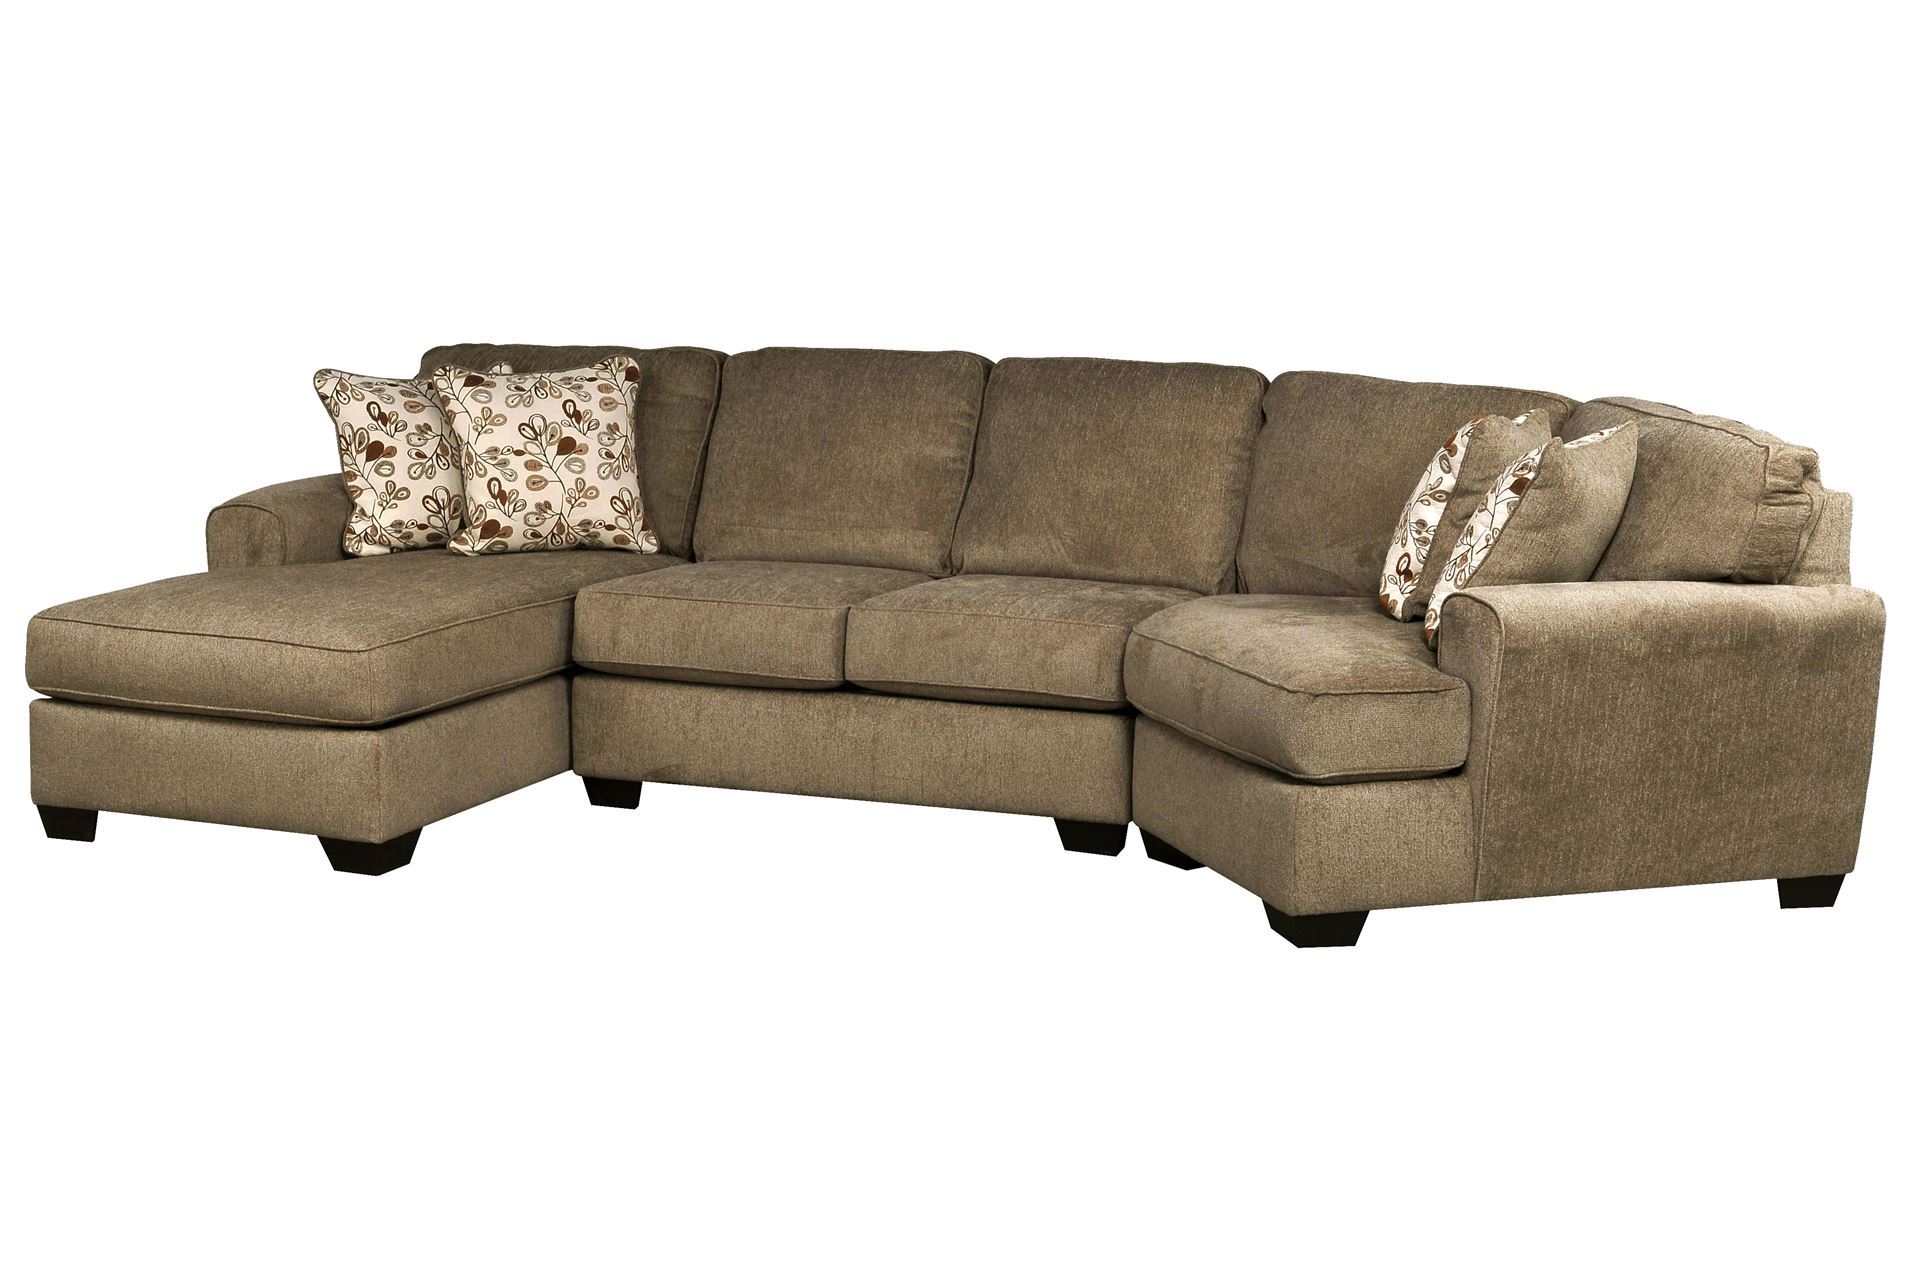 Patola Park 3 Piece Cuddler Sectional W/Laf Corner Chaise ...